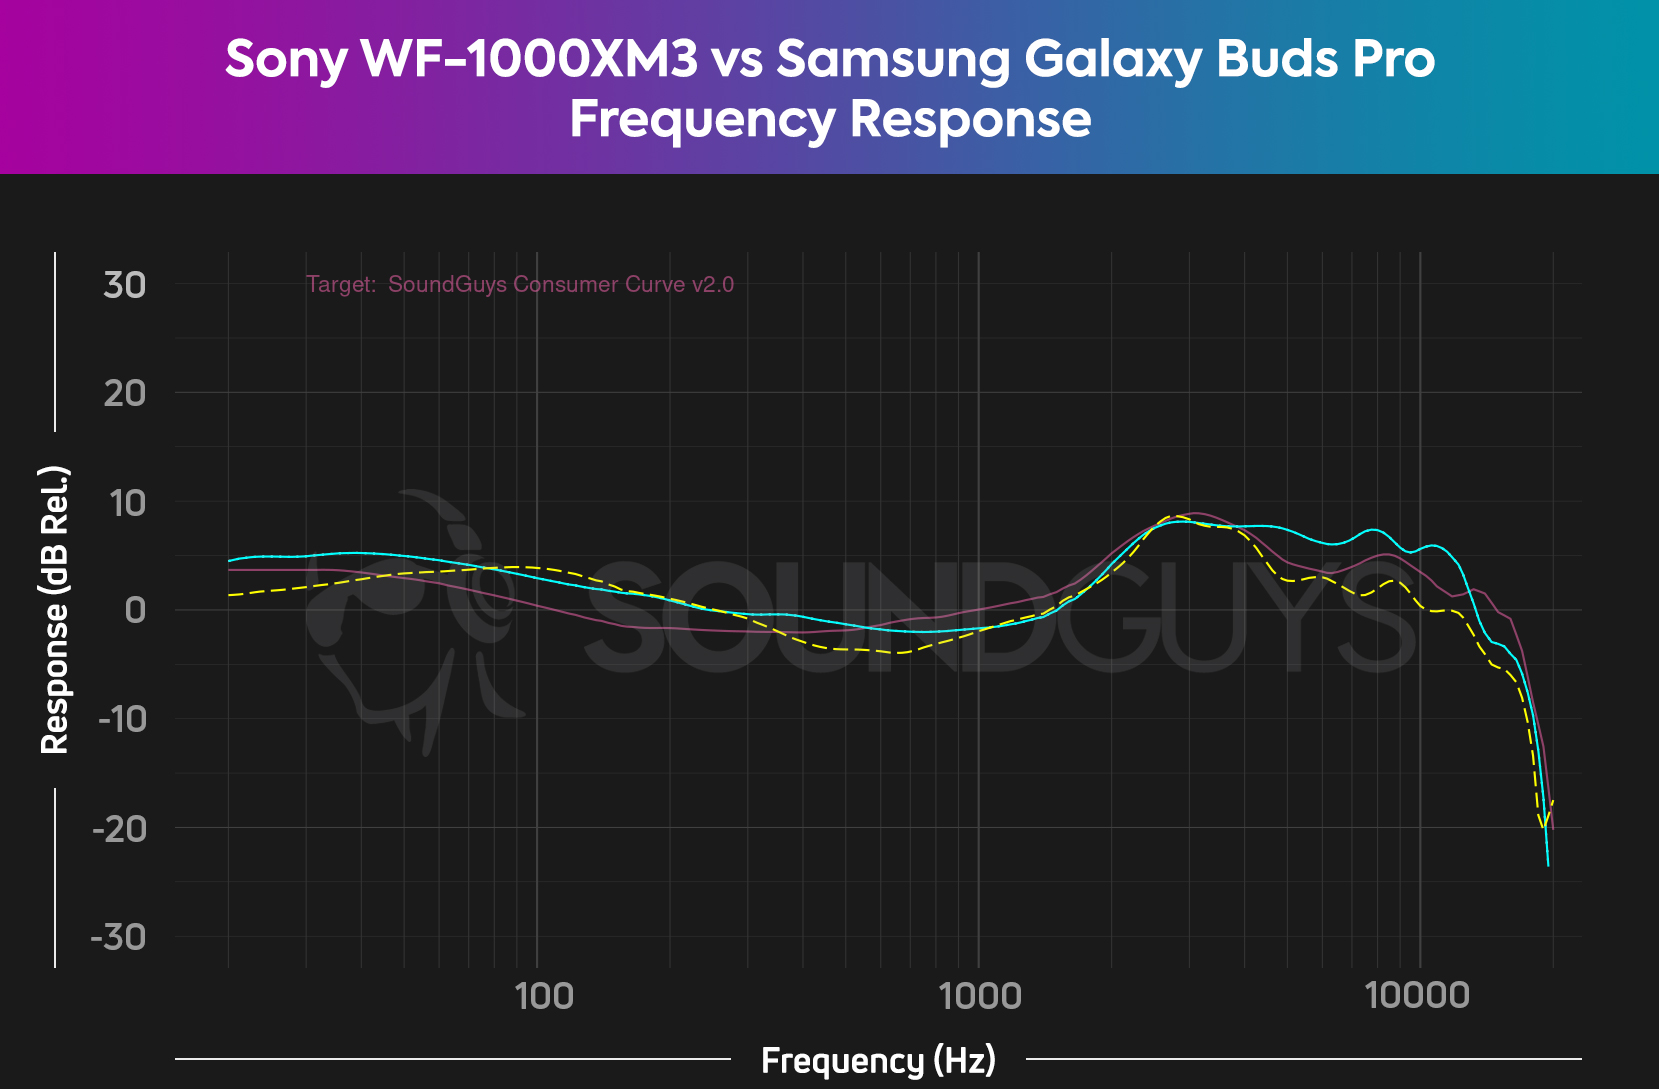 A chart comparing the frequency responses of the Sony WF-1000XM3 and Samsung Galaxy Buds Pro.